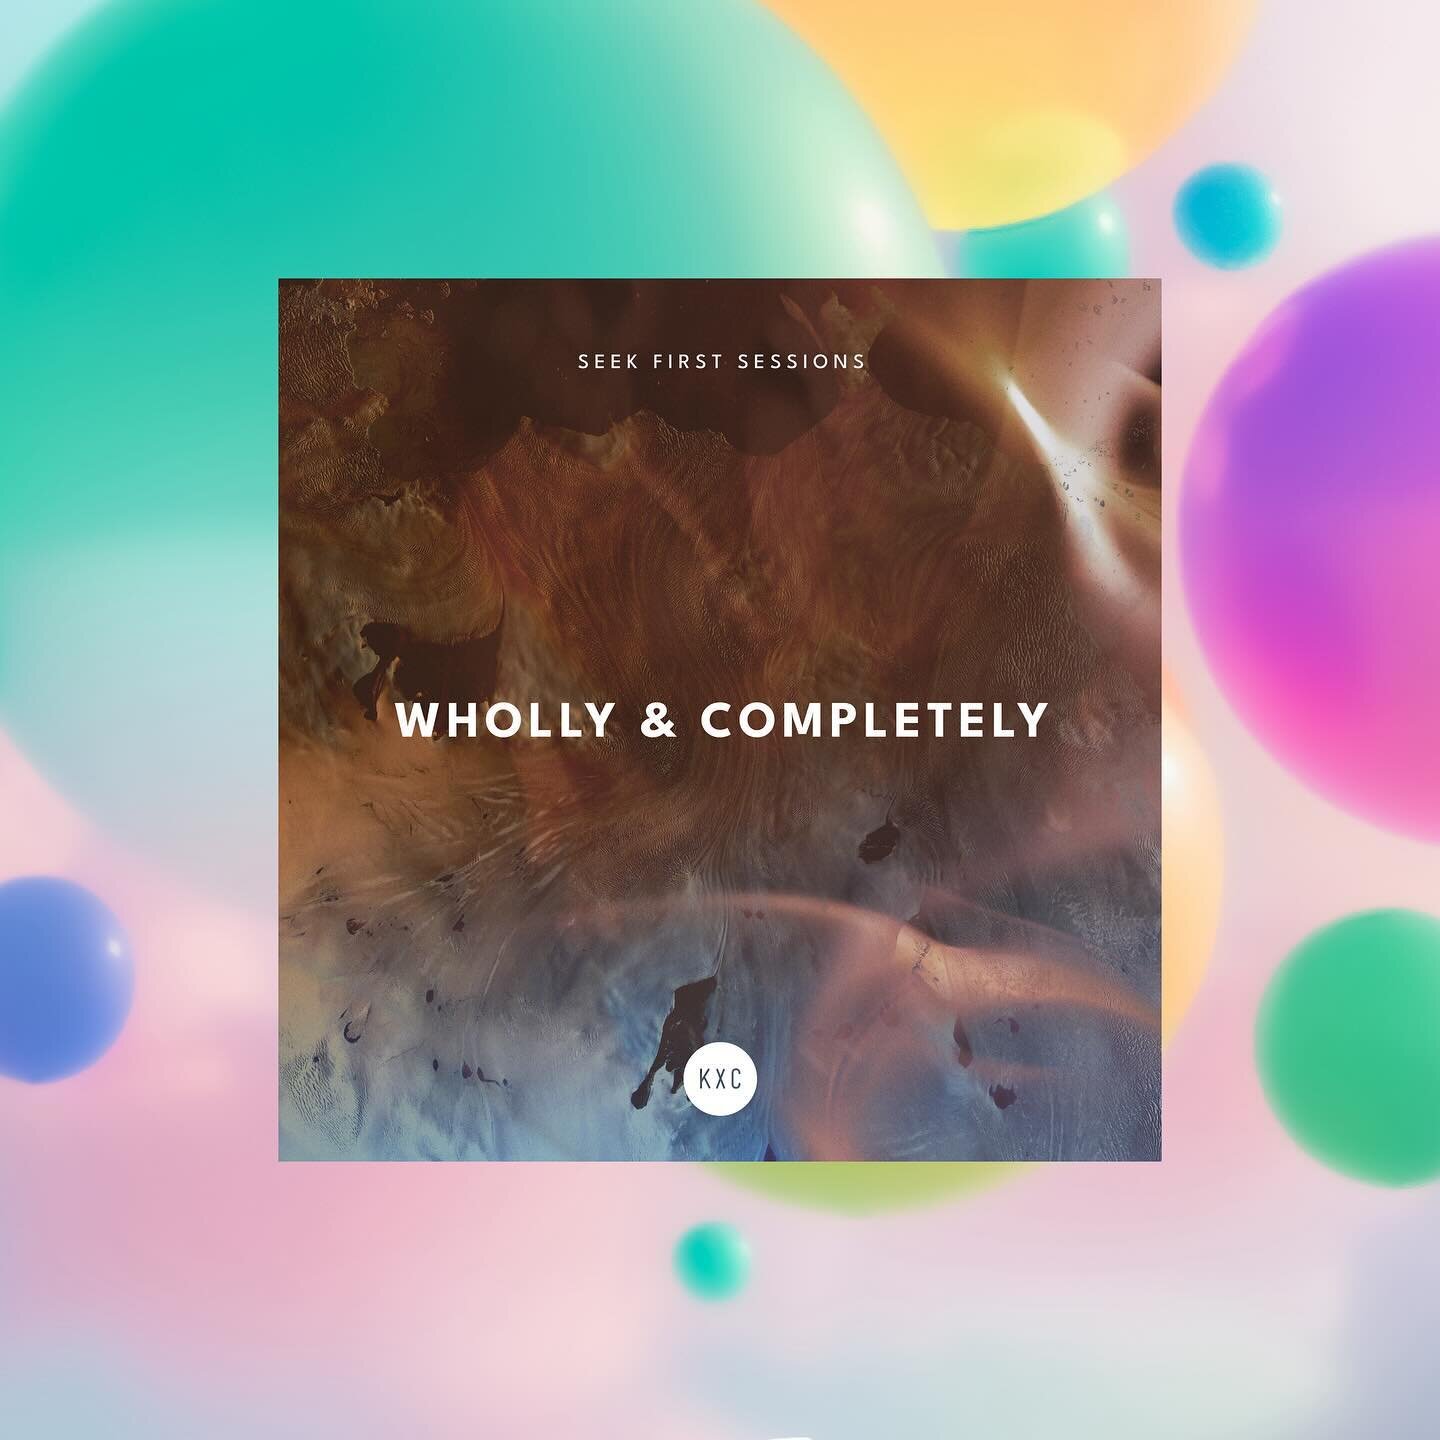 NEW MUSIC FRIDAY 02.02.24
.
.
👾 @kxcworship with &lsquo;Wholly &amp; Completely&rsquo;
👾 @elizakingmusic with her latest single &rsquo;Foolish &amp; Ruined&rsquo;
👾 @7hillsworship releases &lsquo;Water and Bone&rsquo;
👾 @benjamin.george.potter is